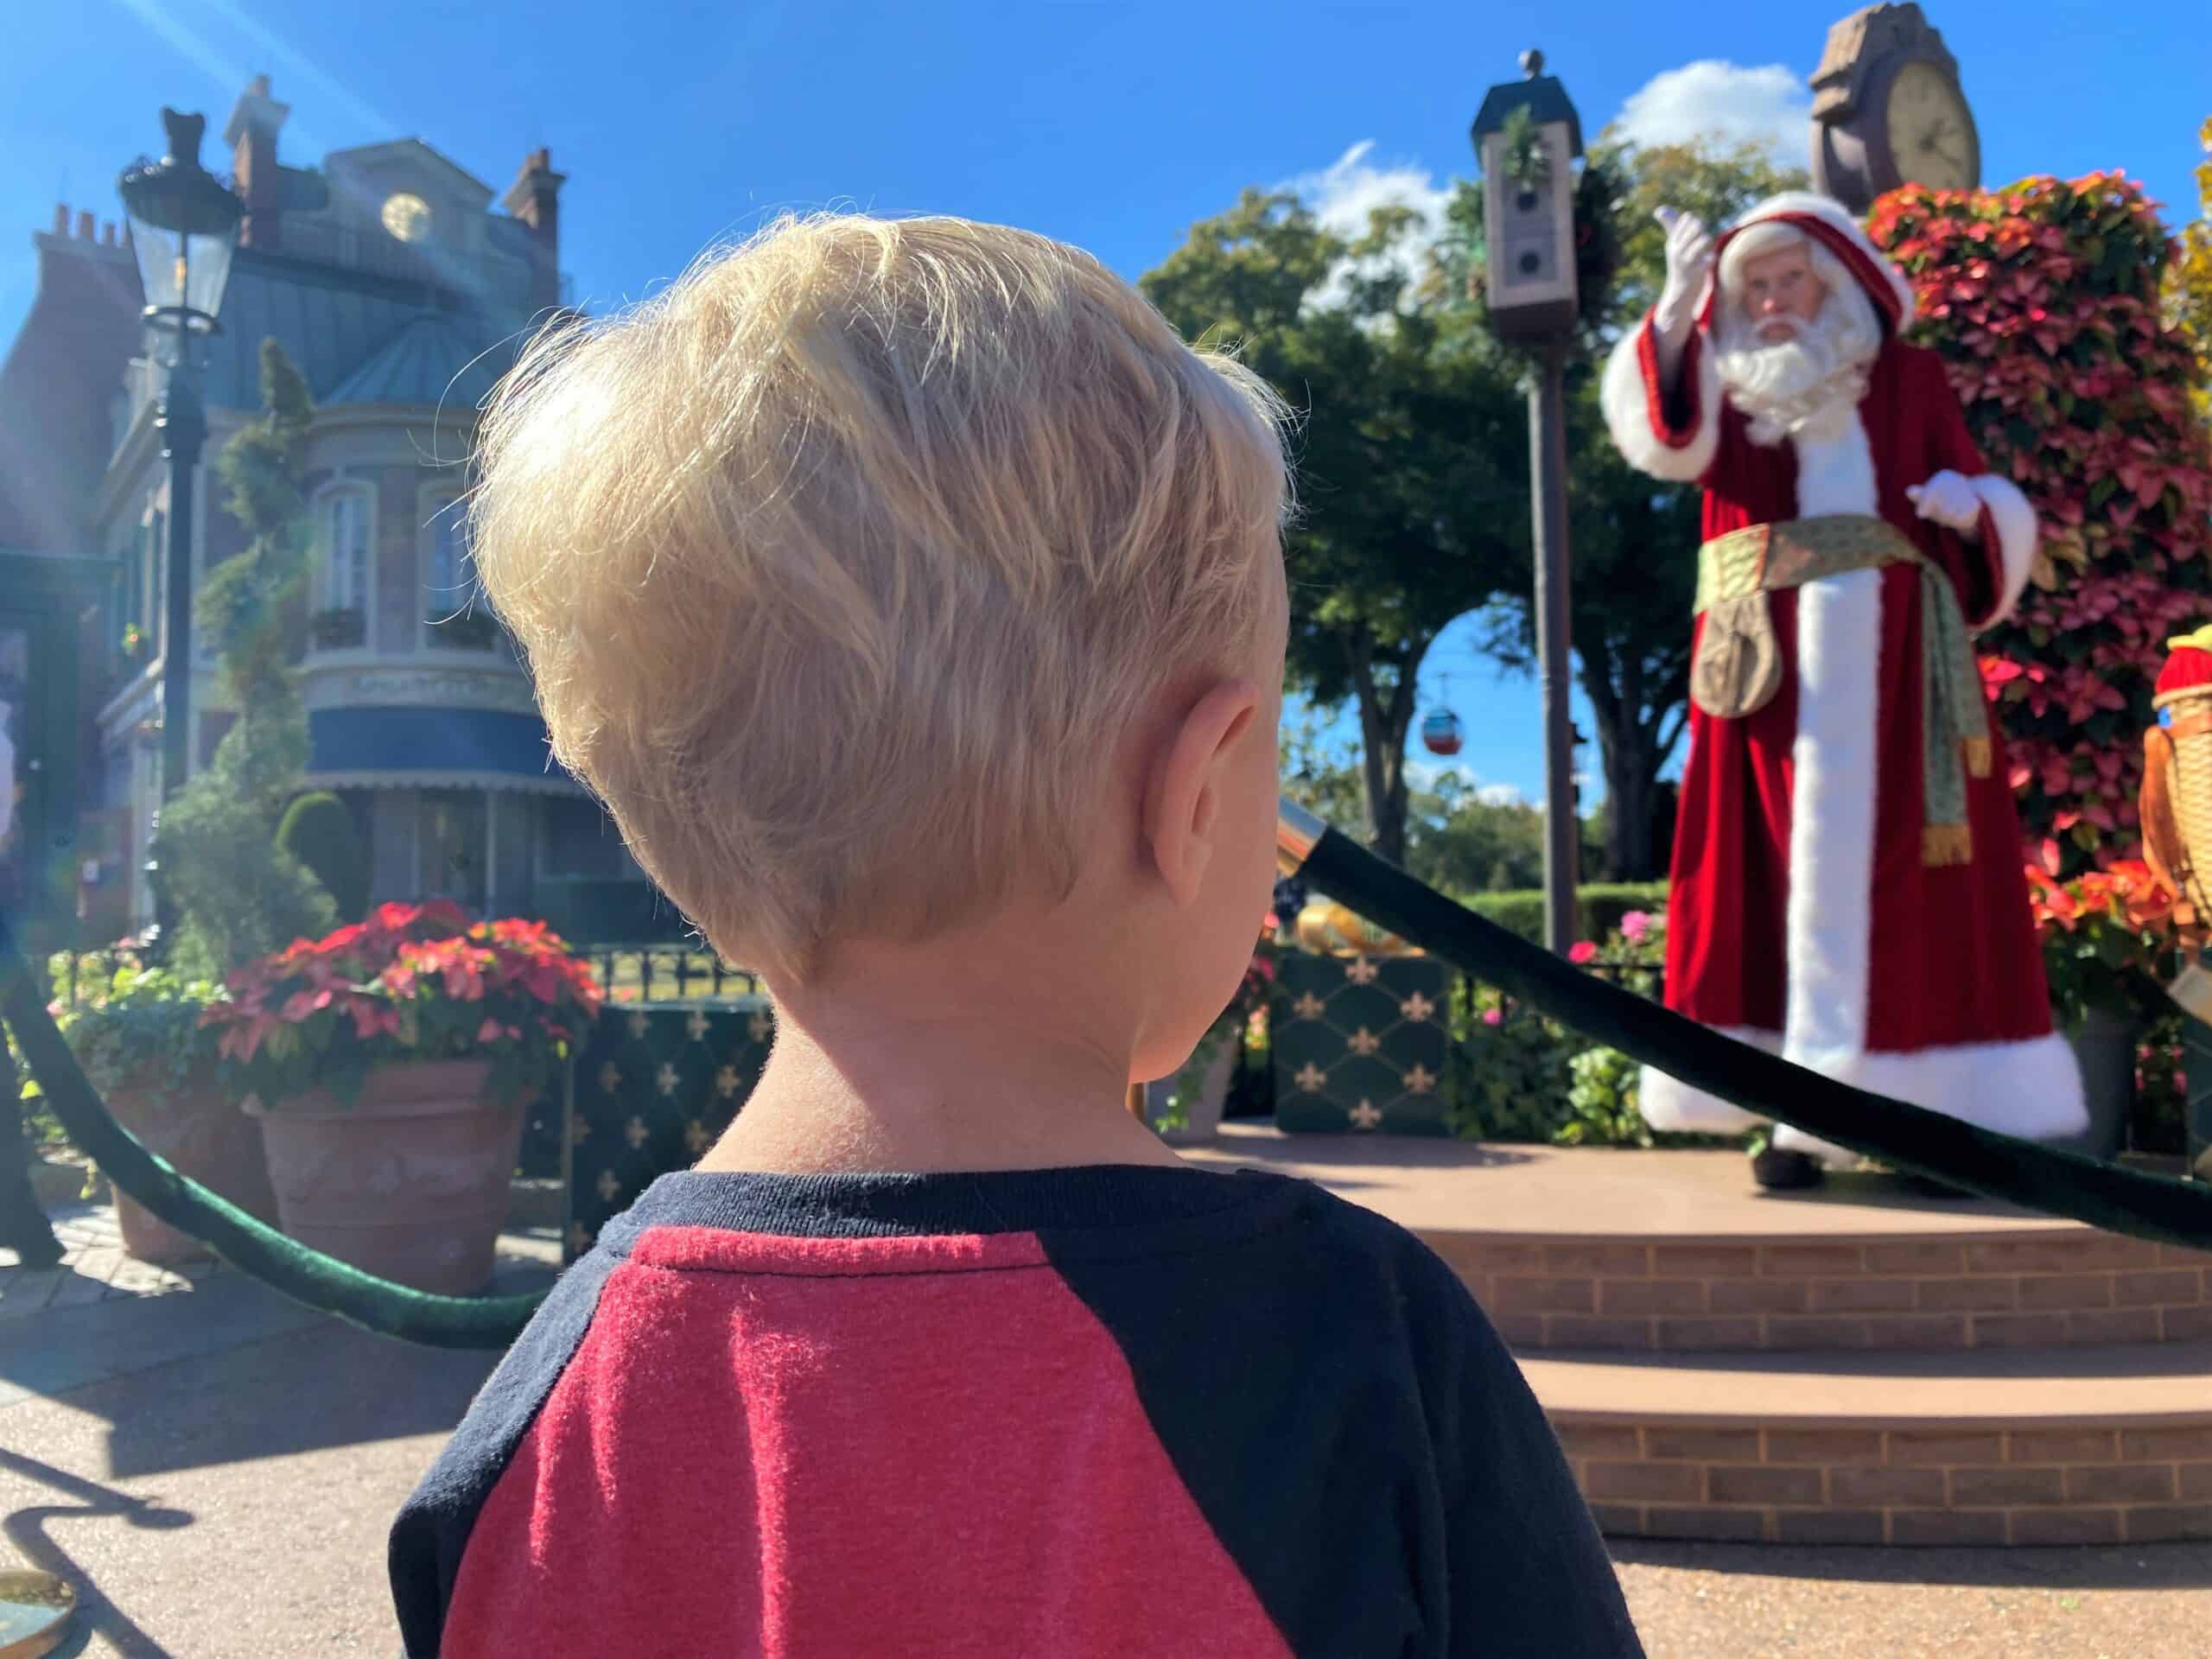 Pere Noel Holiday Storyteller at EPCOT France Pavilion stands on a small stage wearing a winter coat with deep red colored fur and white trim. In the foreground a three year old boy with blonde hair and a red long sleeve shirt watches the show.